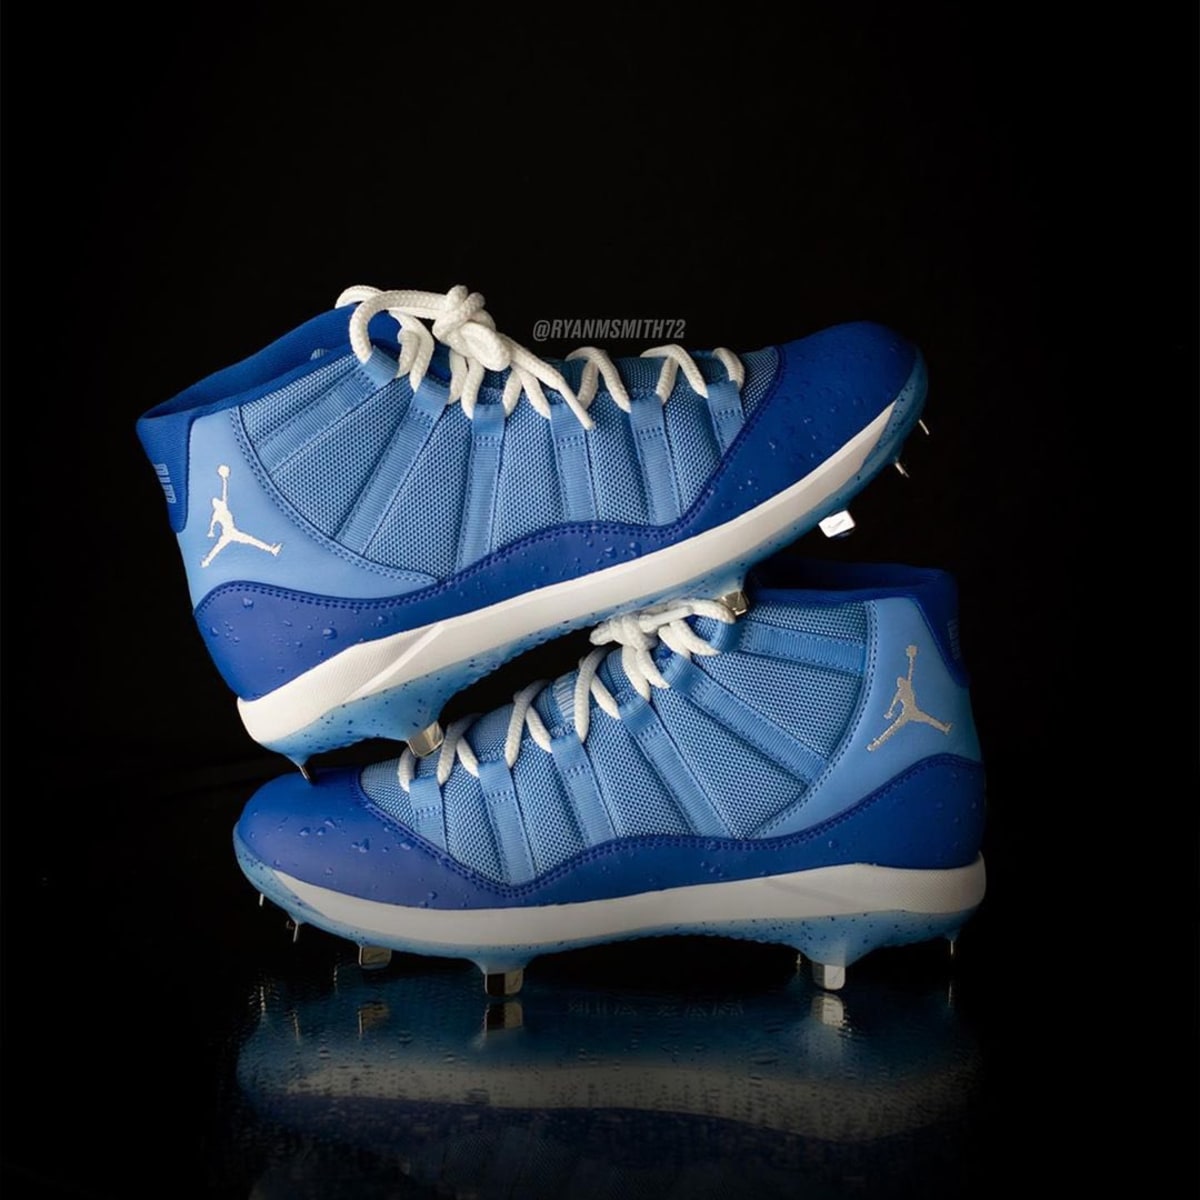 Coolest cleats of the MLB season